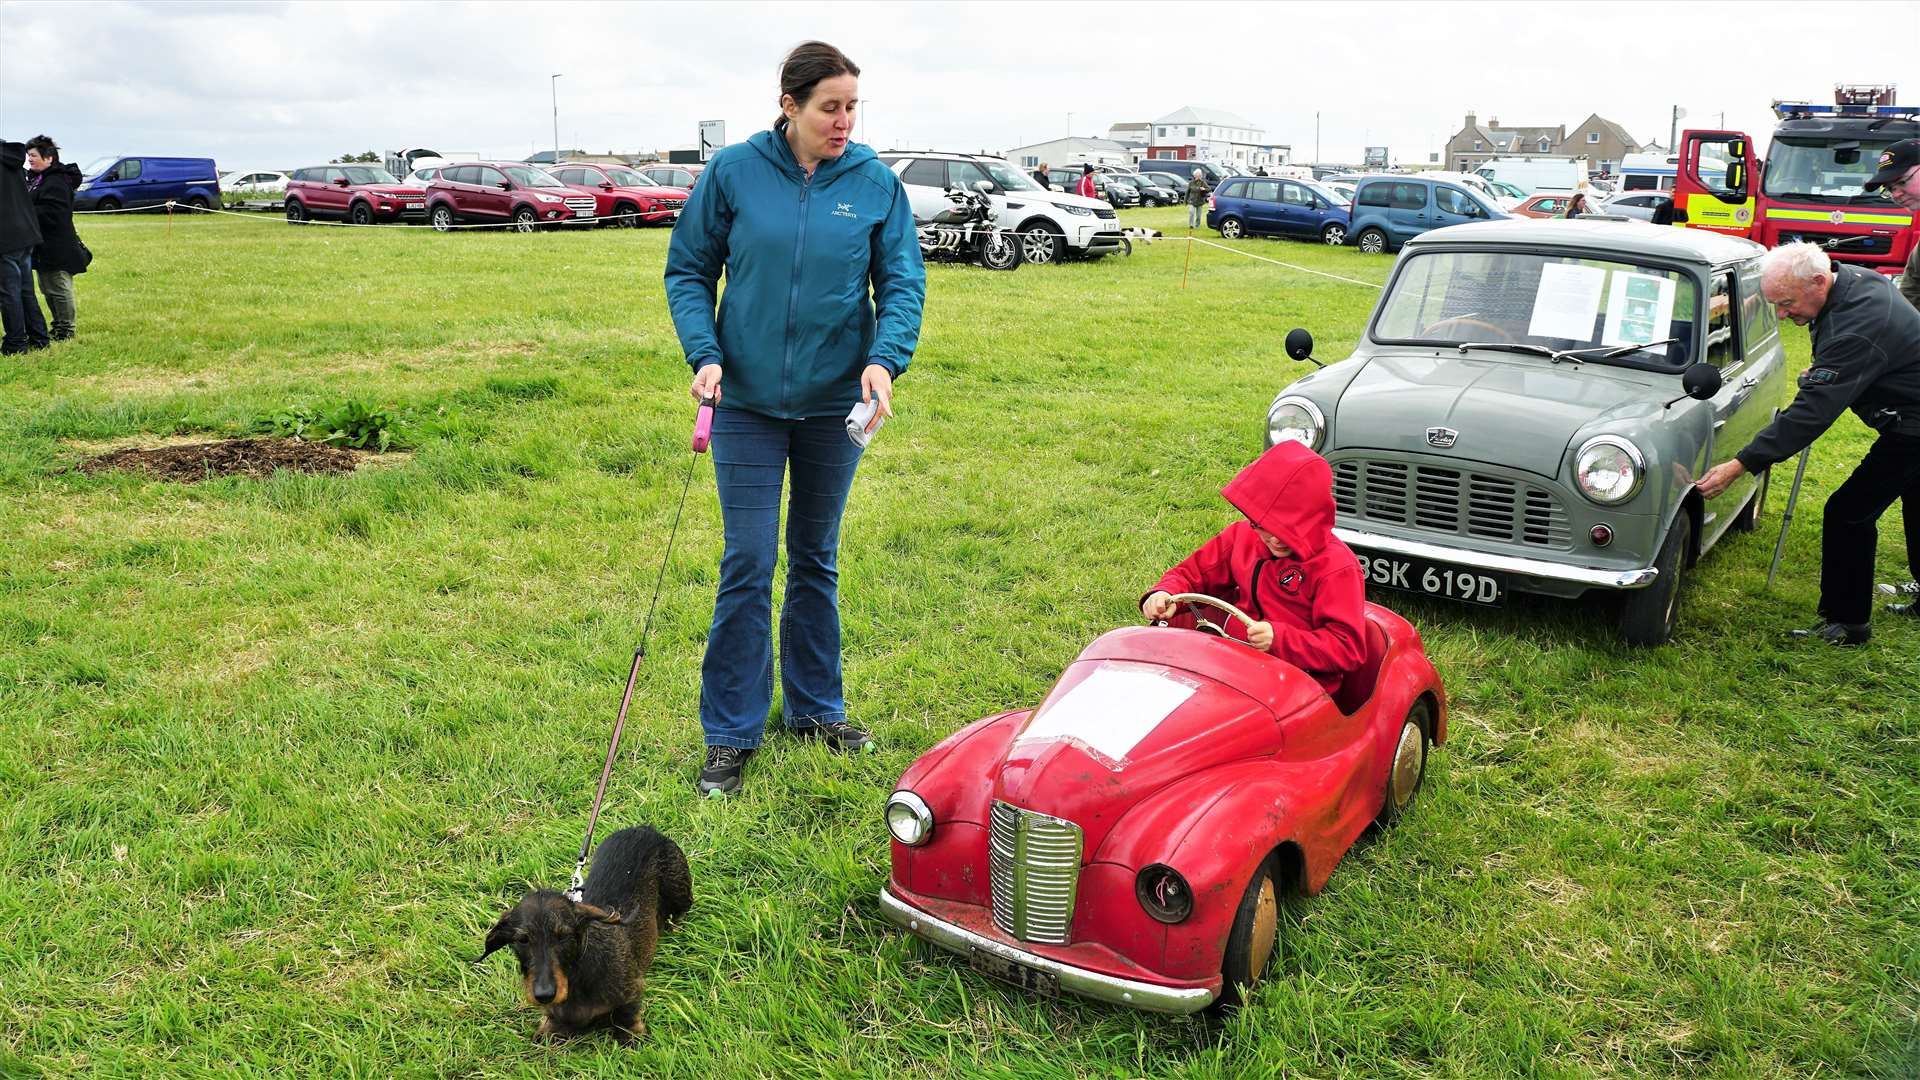 Austin J40 Pedal Car that was a hit with young children. Picture: DGS